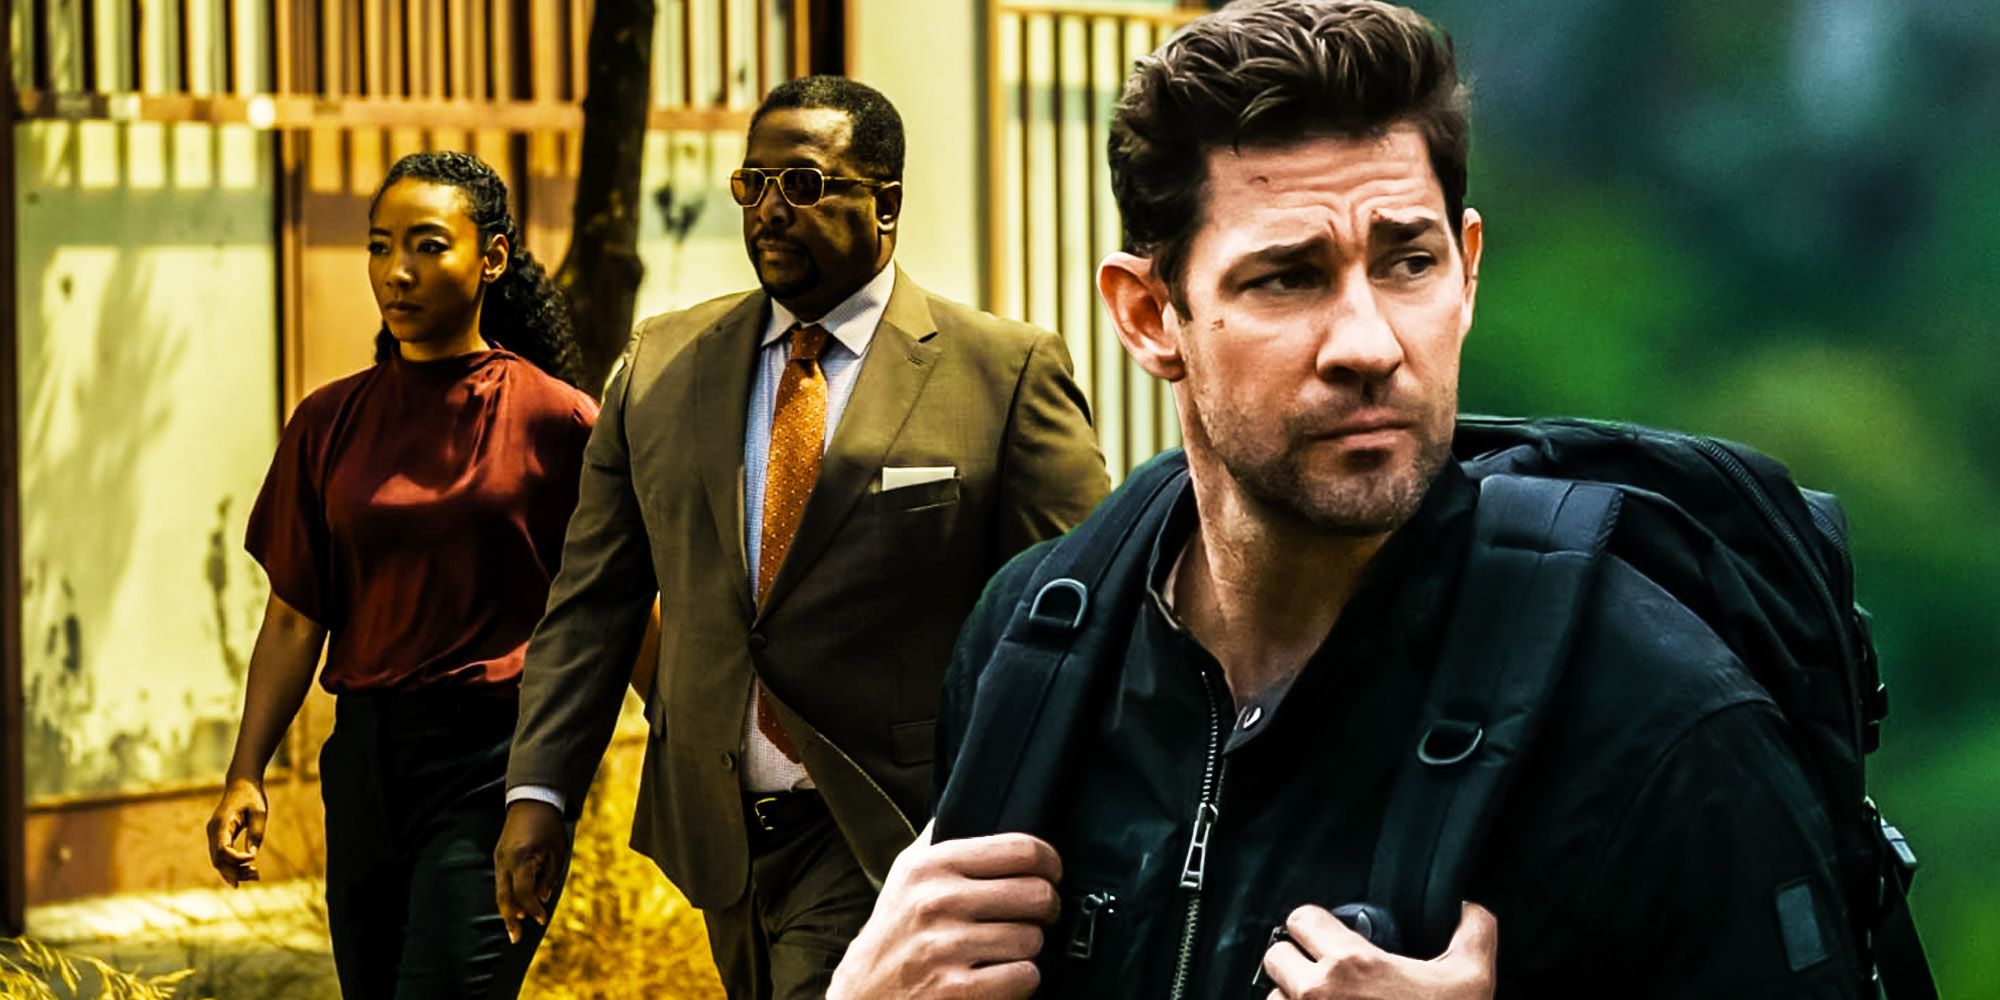 Jack Ryan Season 4 (Episode 1-2) Ending Explained - Was The CIA Tricked Into Helping Terrorist Organisation? 